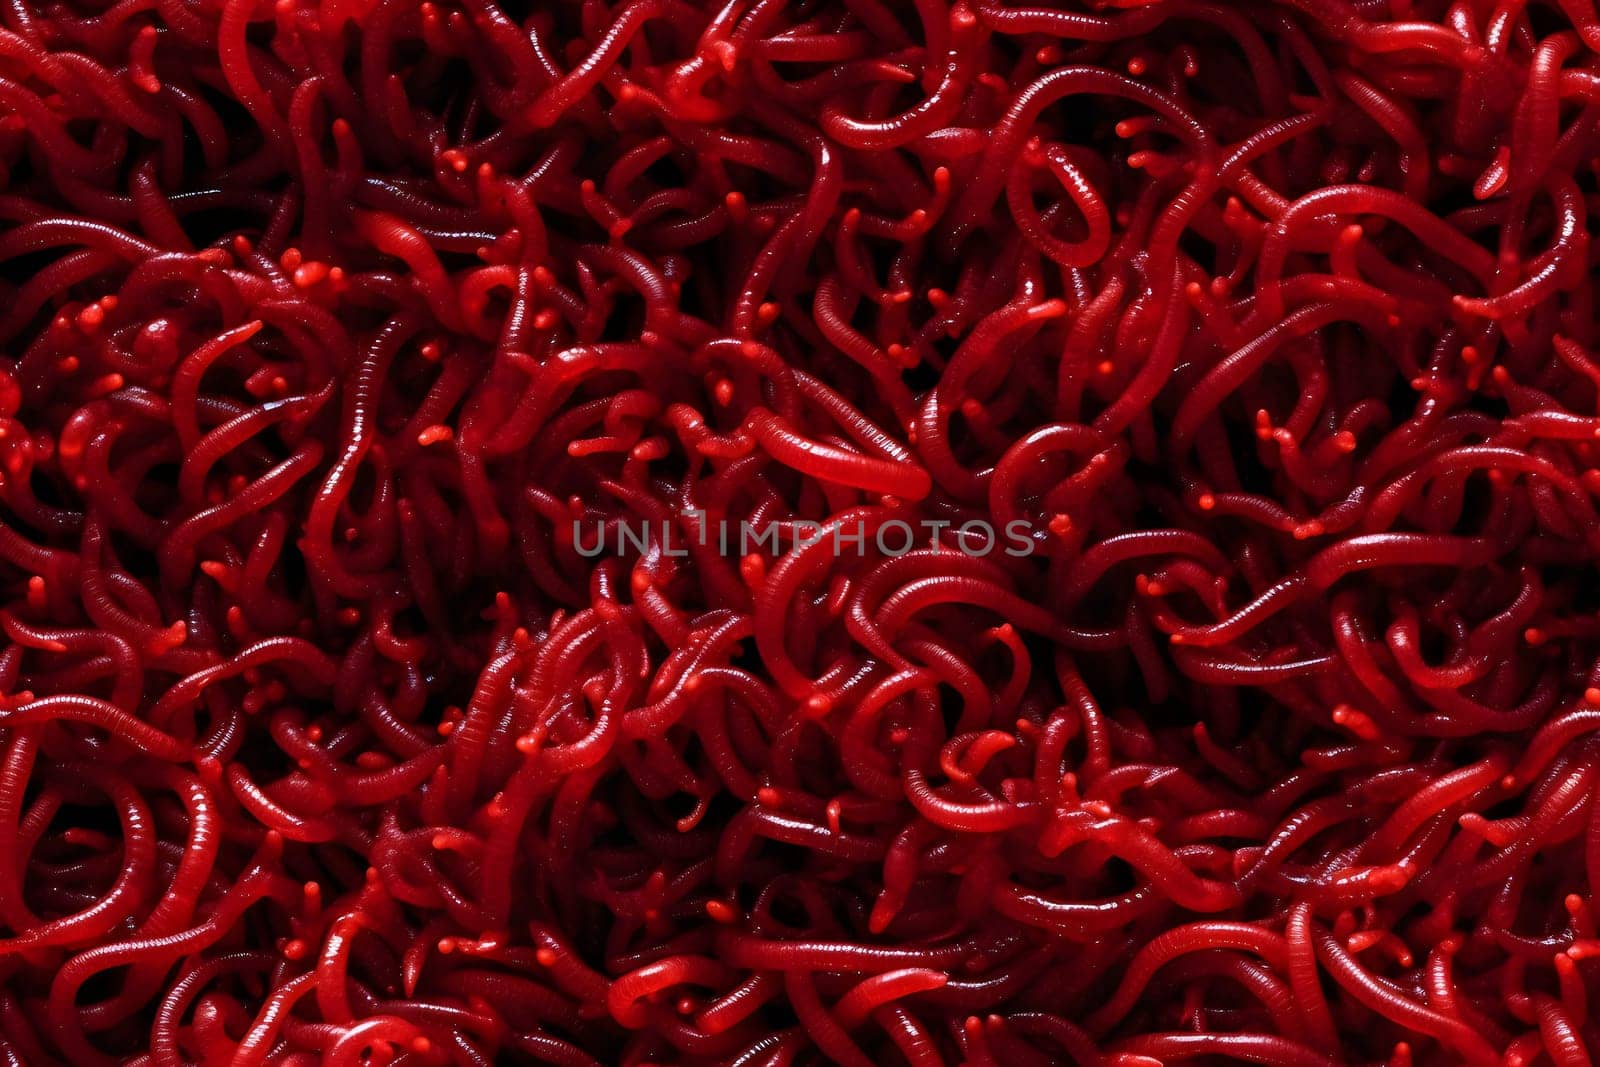 red worms full-frame background and seamless texture. Neural network generated in May 2023. Not based on any actual scene or pattern.